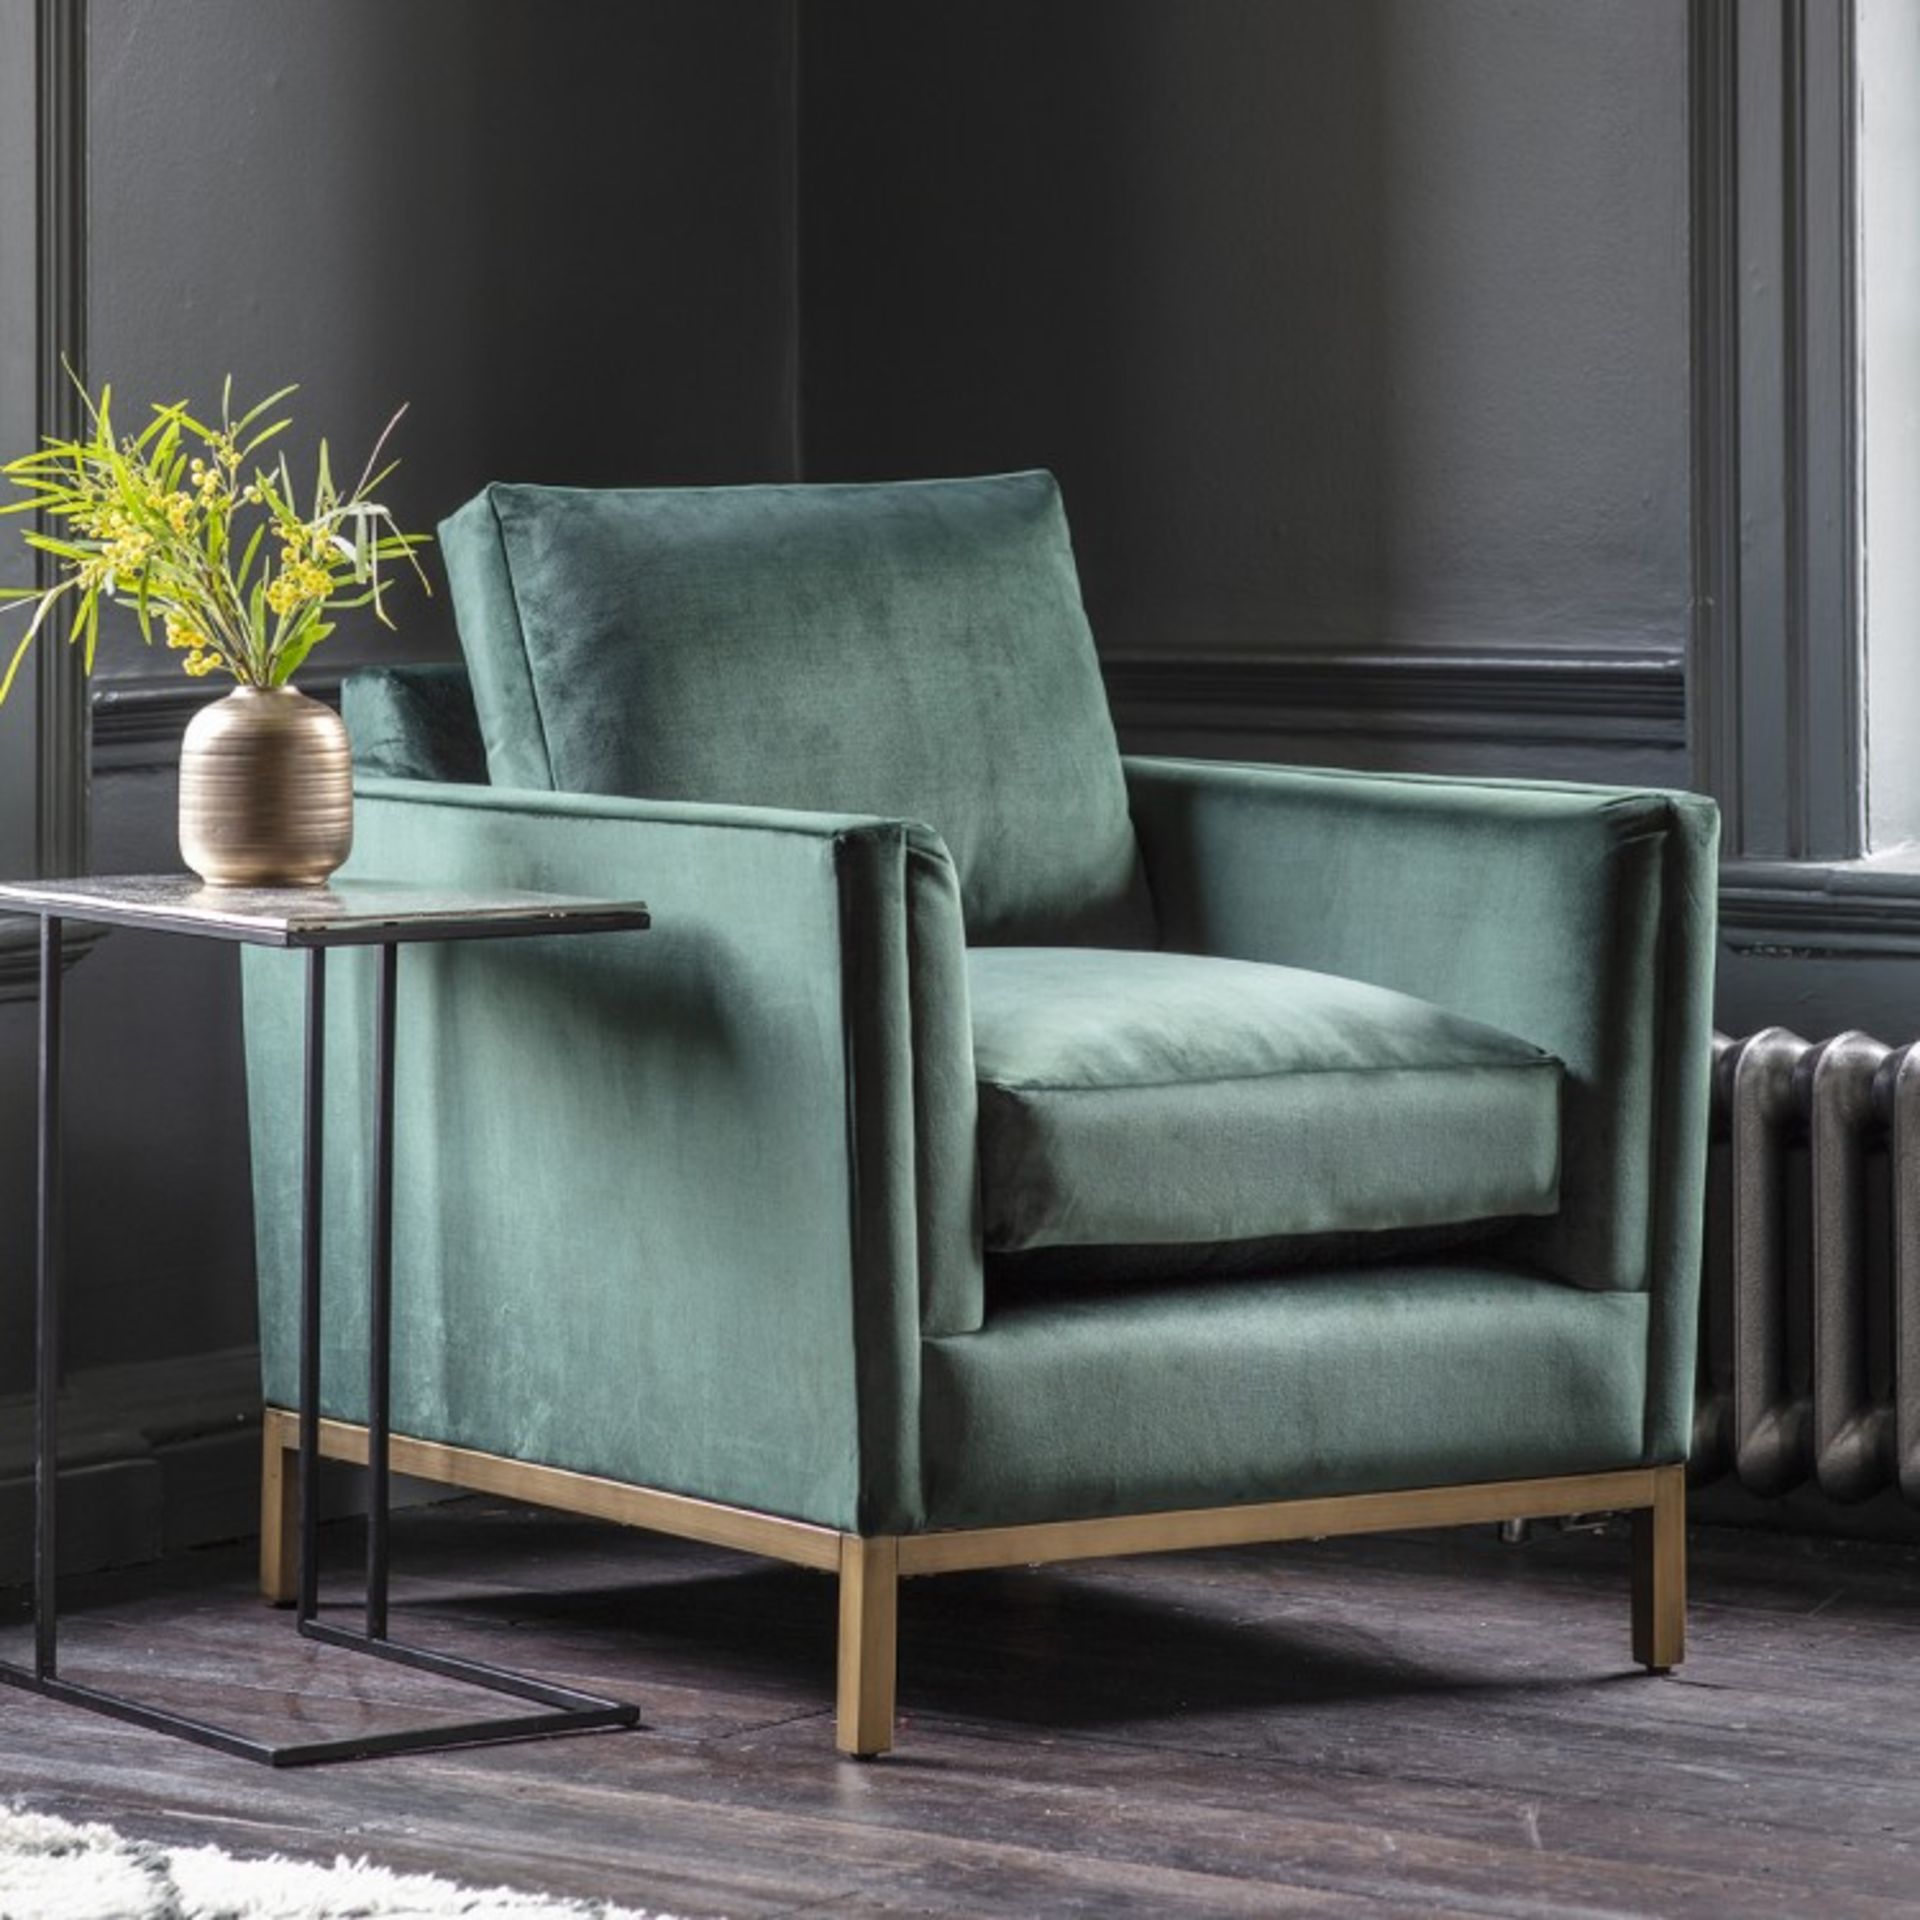 Treyford Armchair Berwick Steel The Treyford collection is one of our most impressive. Experience